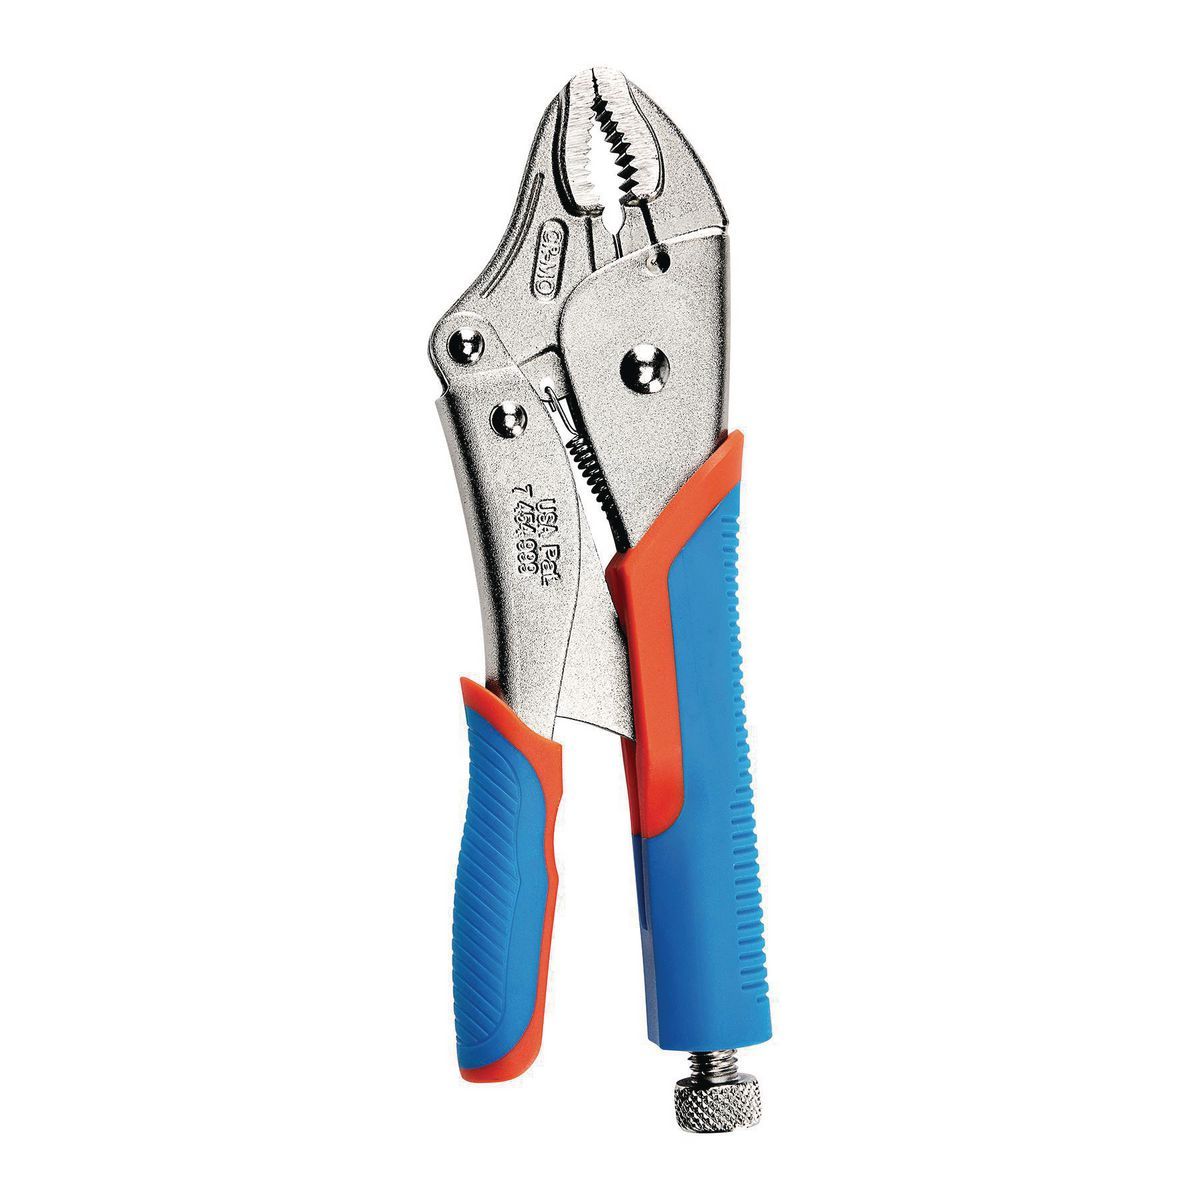 BREMEN 10 in. SPEED RELEASE Curved Jaw Locking Pliers with Grip